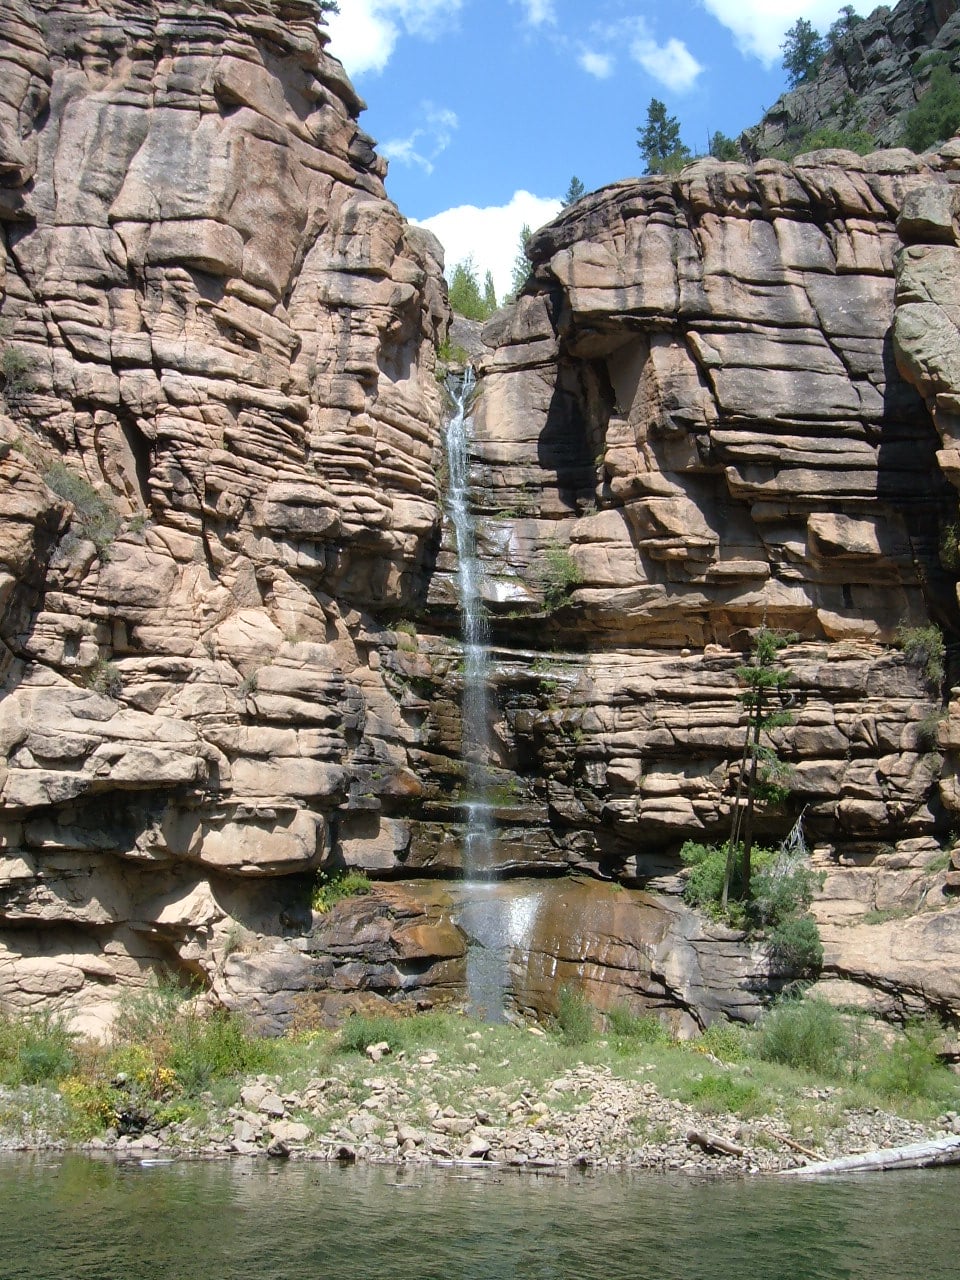 Outdoor waterfall in the rocky mountians on a sunny day.